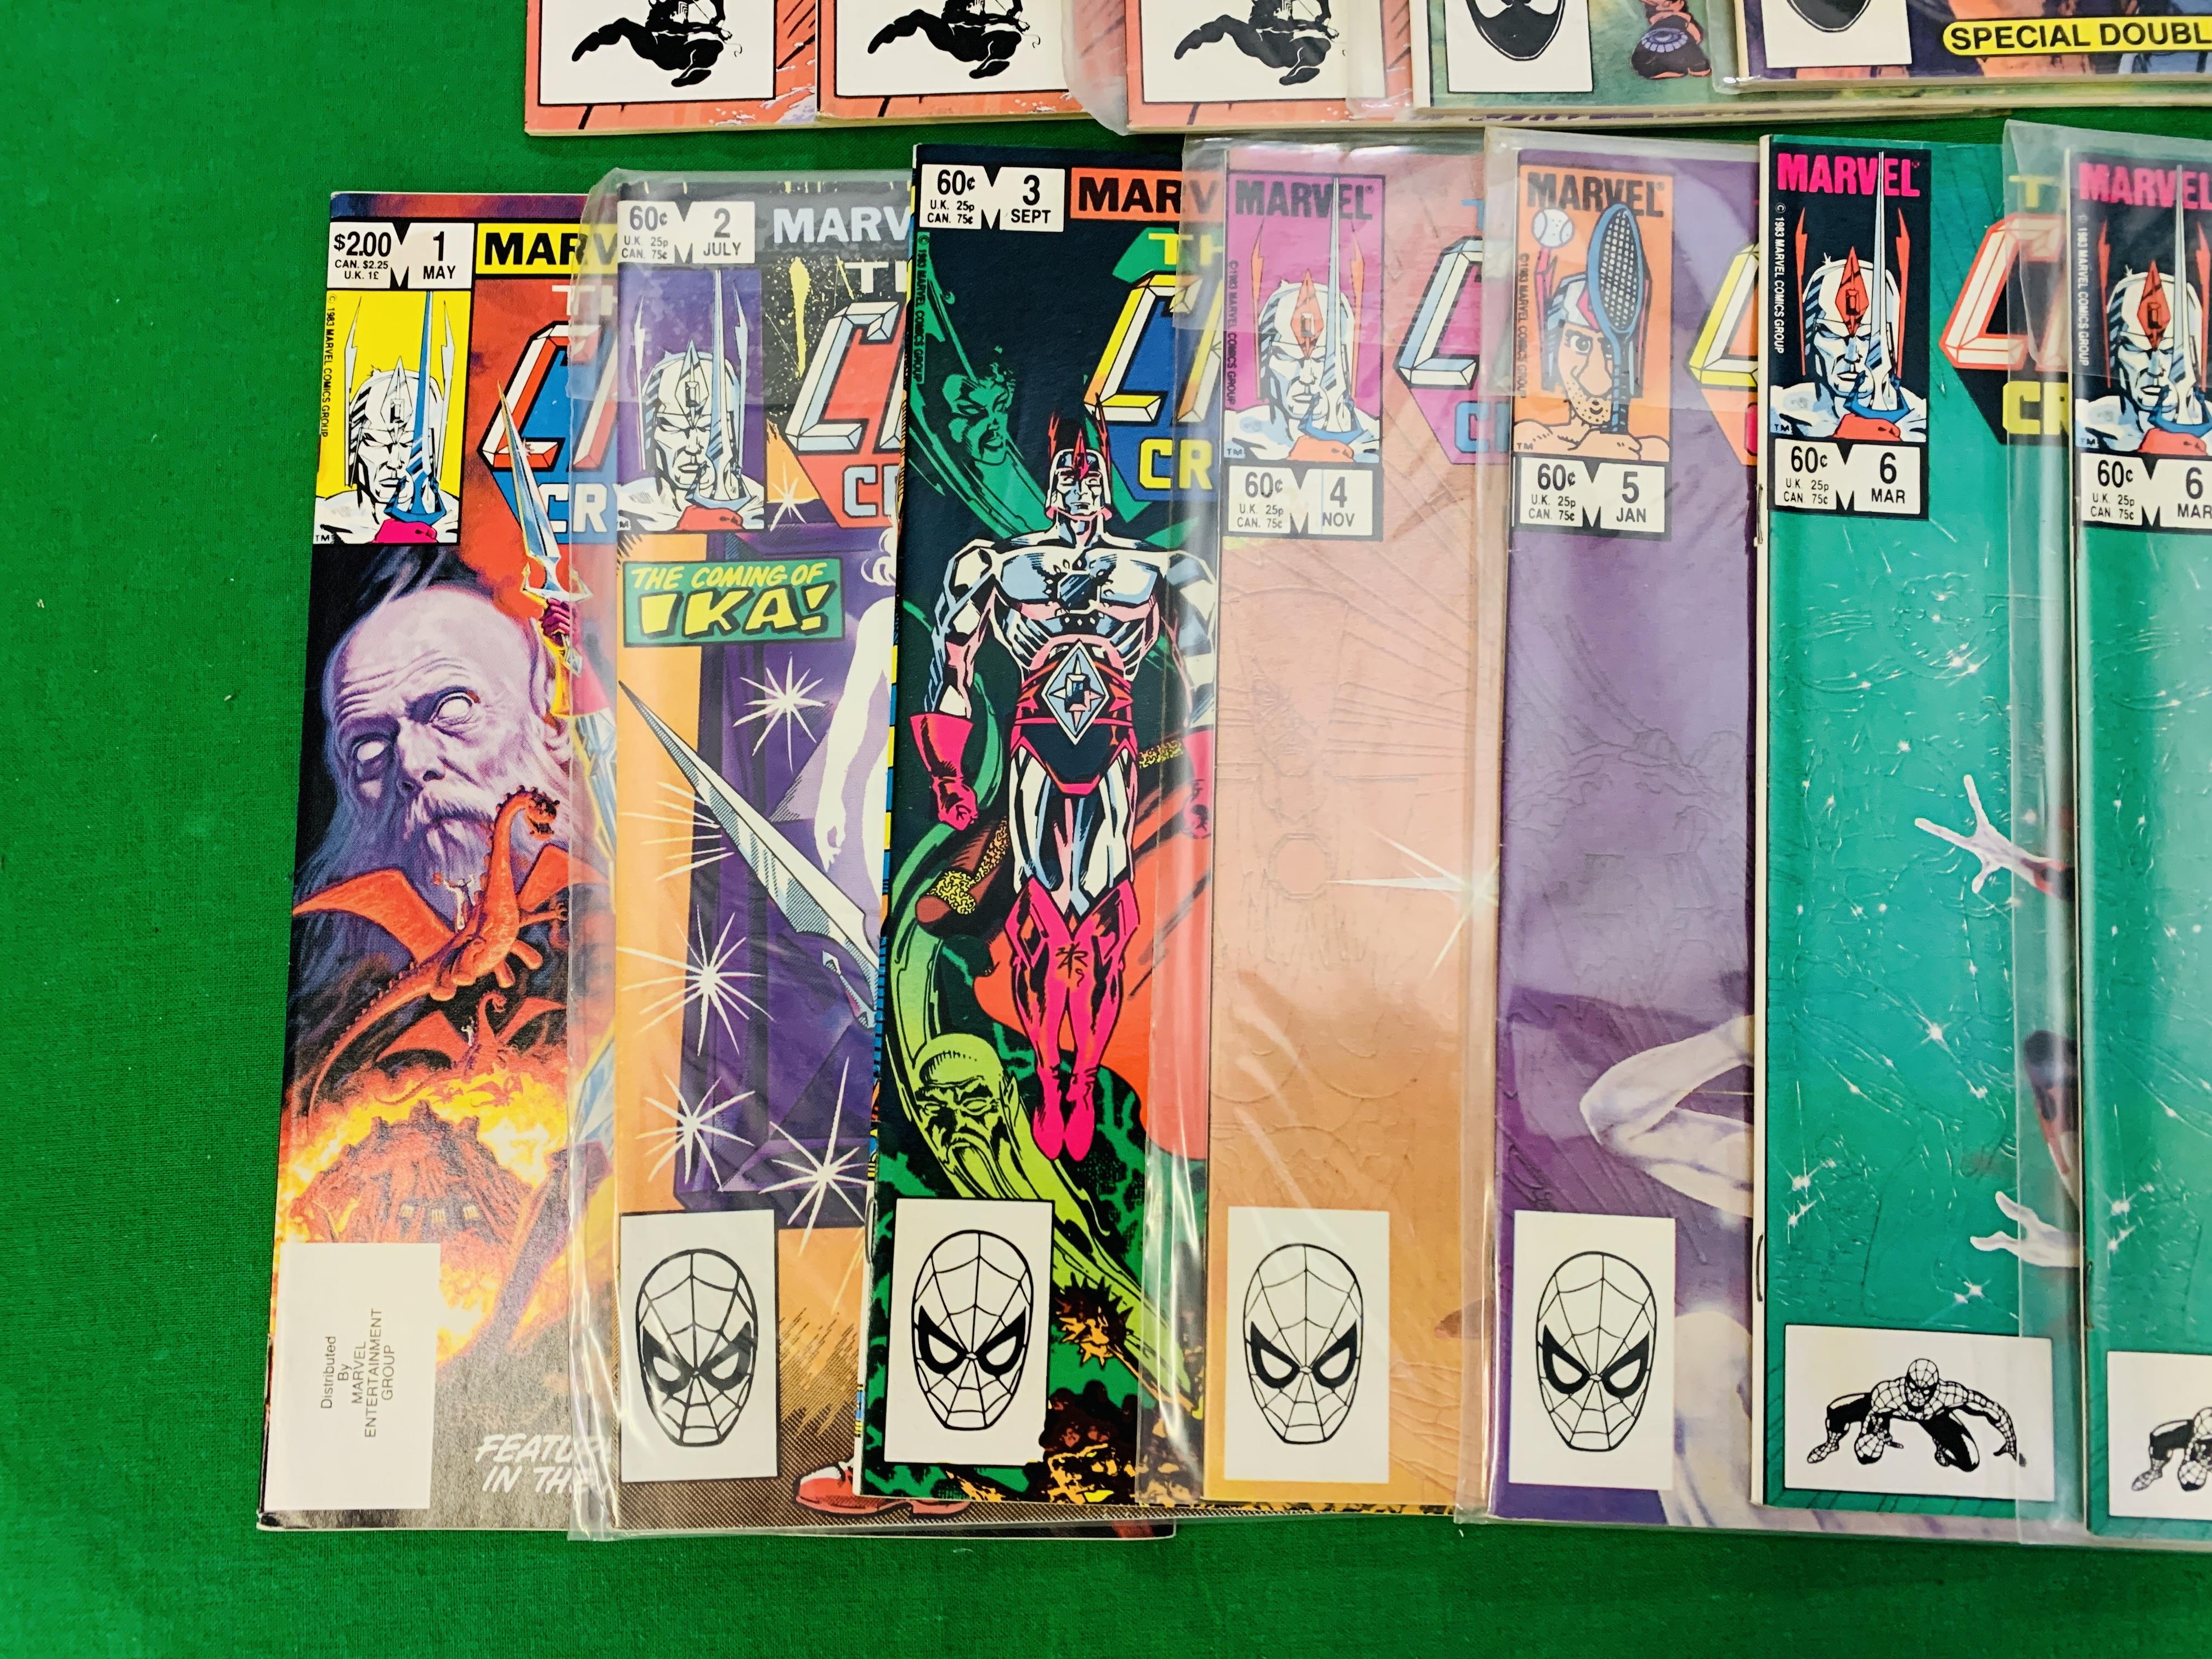 MARVEL COMICS CRYSTAR CRYSTAL WARRIOR NO. 1 - 11 FROM 1983, COUPLE OF DUPLICATES, INCLUDES NO. 8. - Image 2 of 4